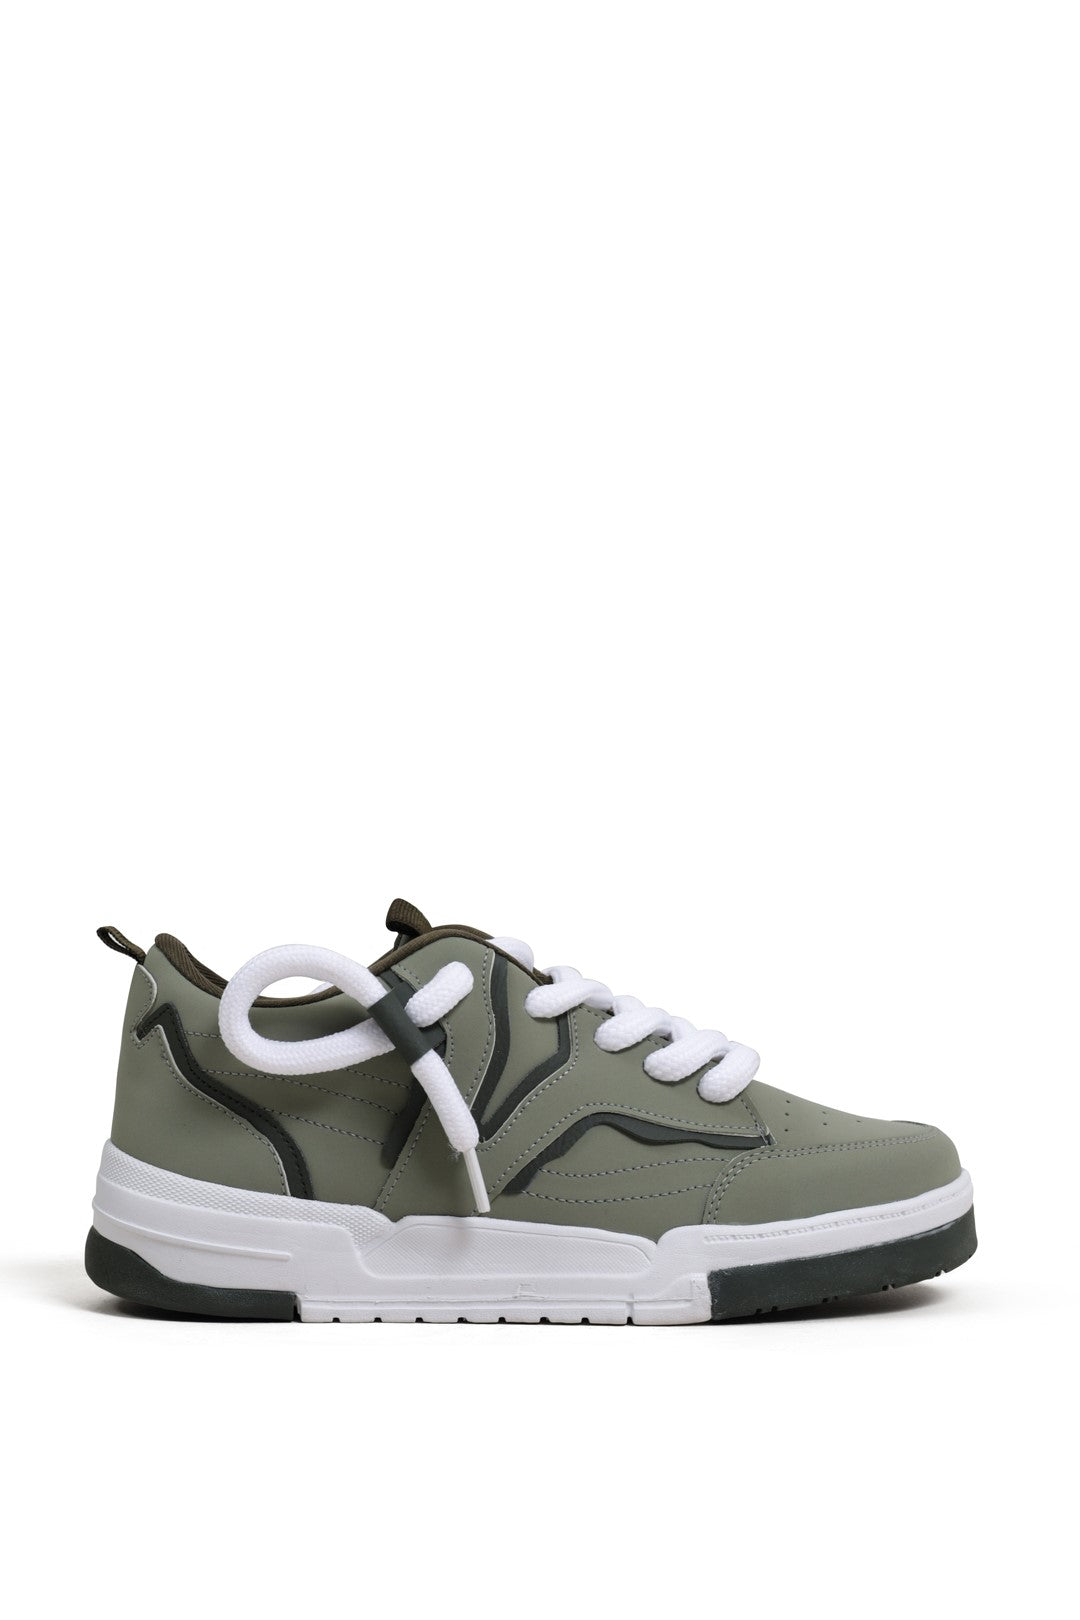 Vapro Lime Green Low Top Trainer